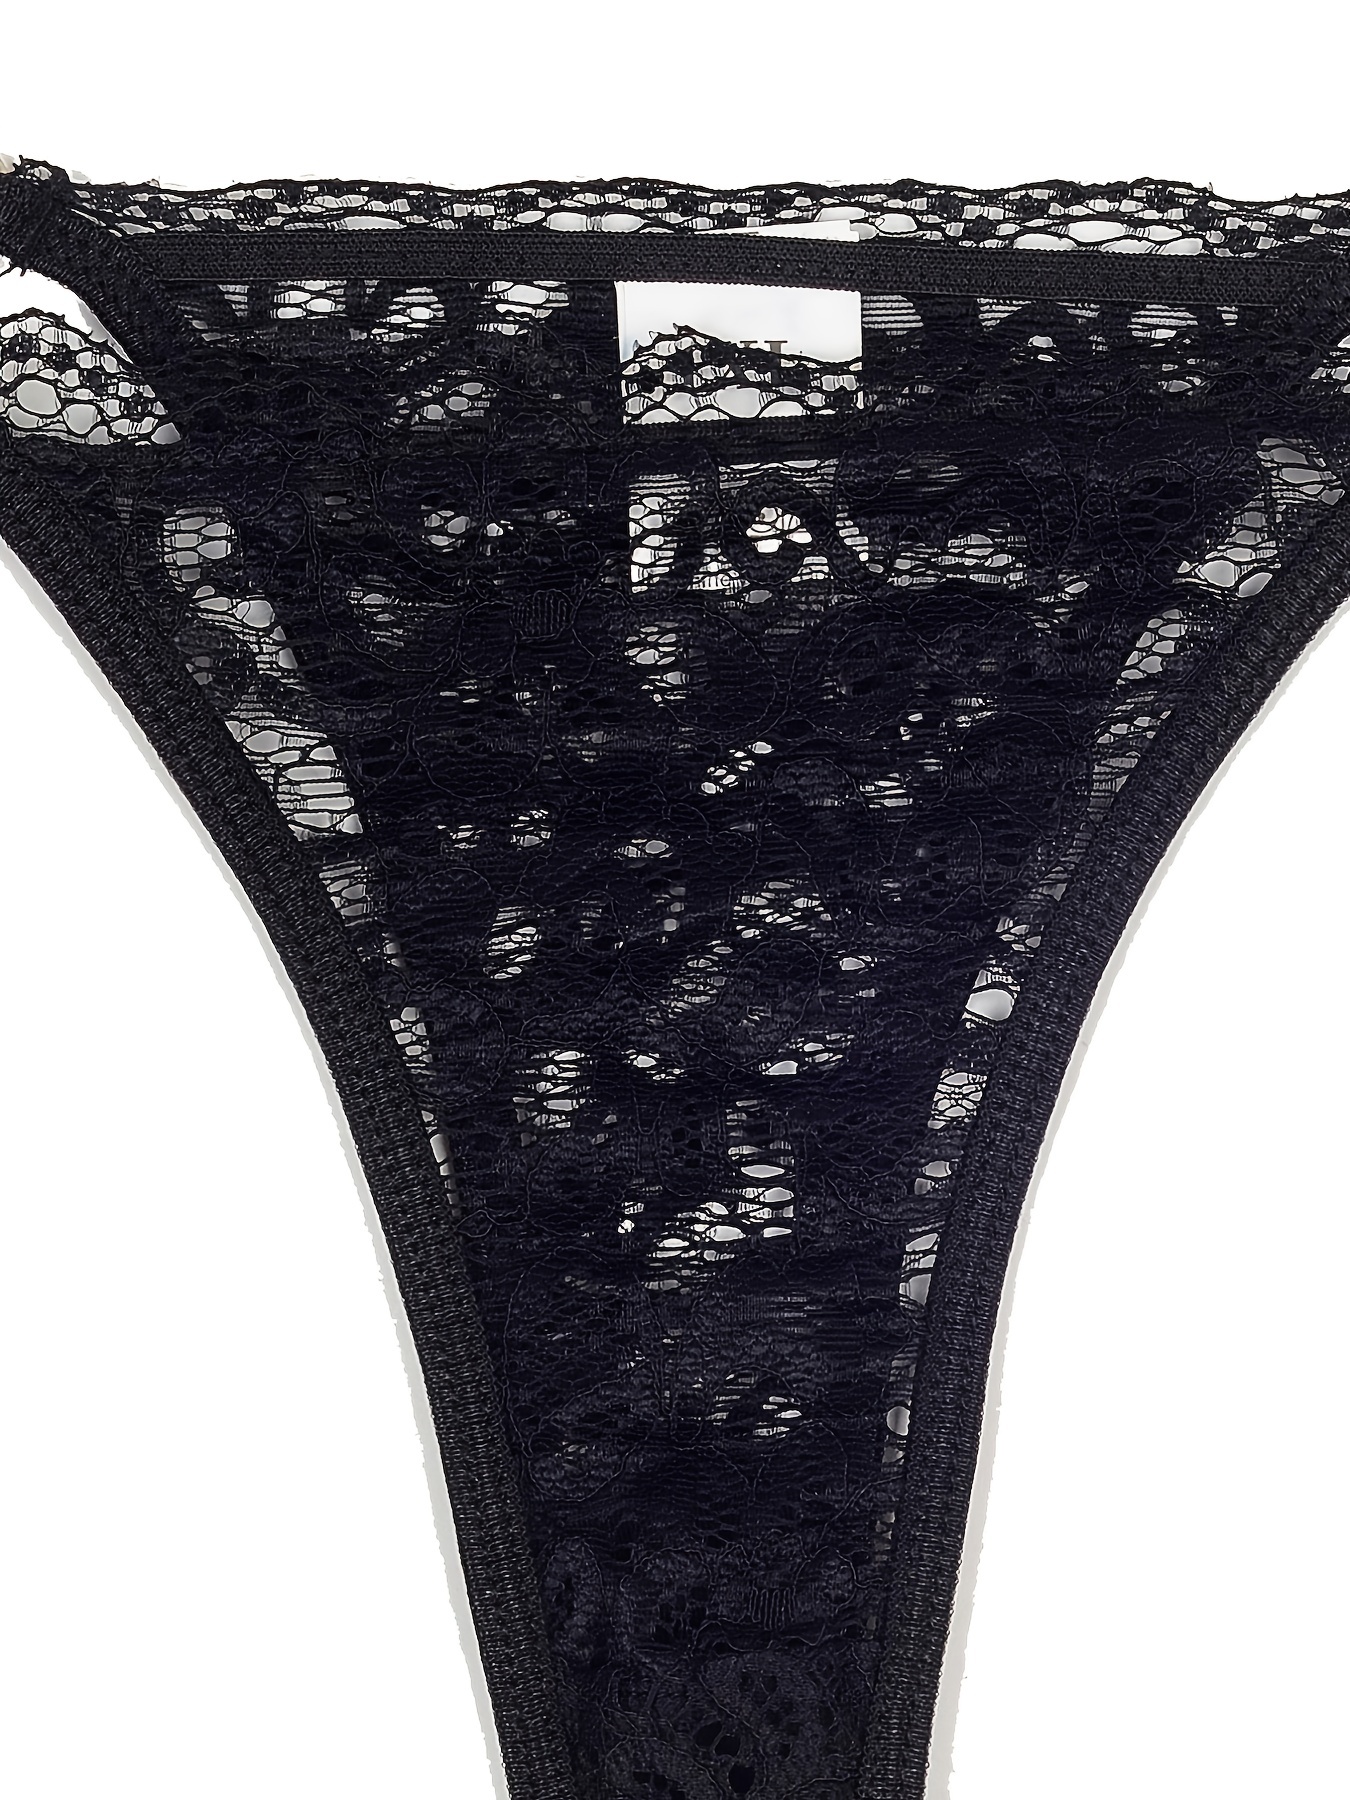 2pc Women Sexy Lace Crotchless Thongs Panties Underwear Lingerie G